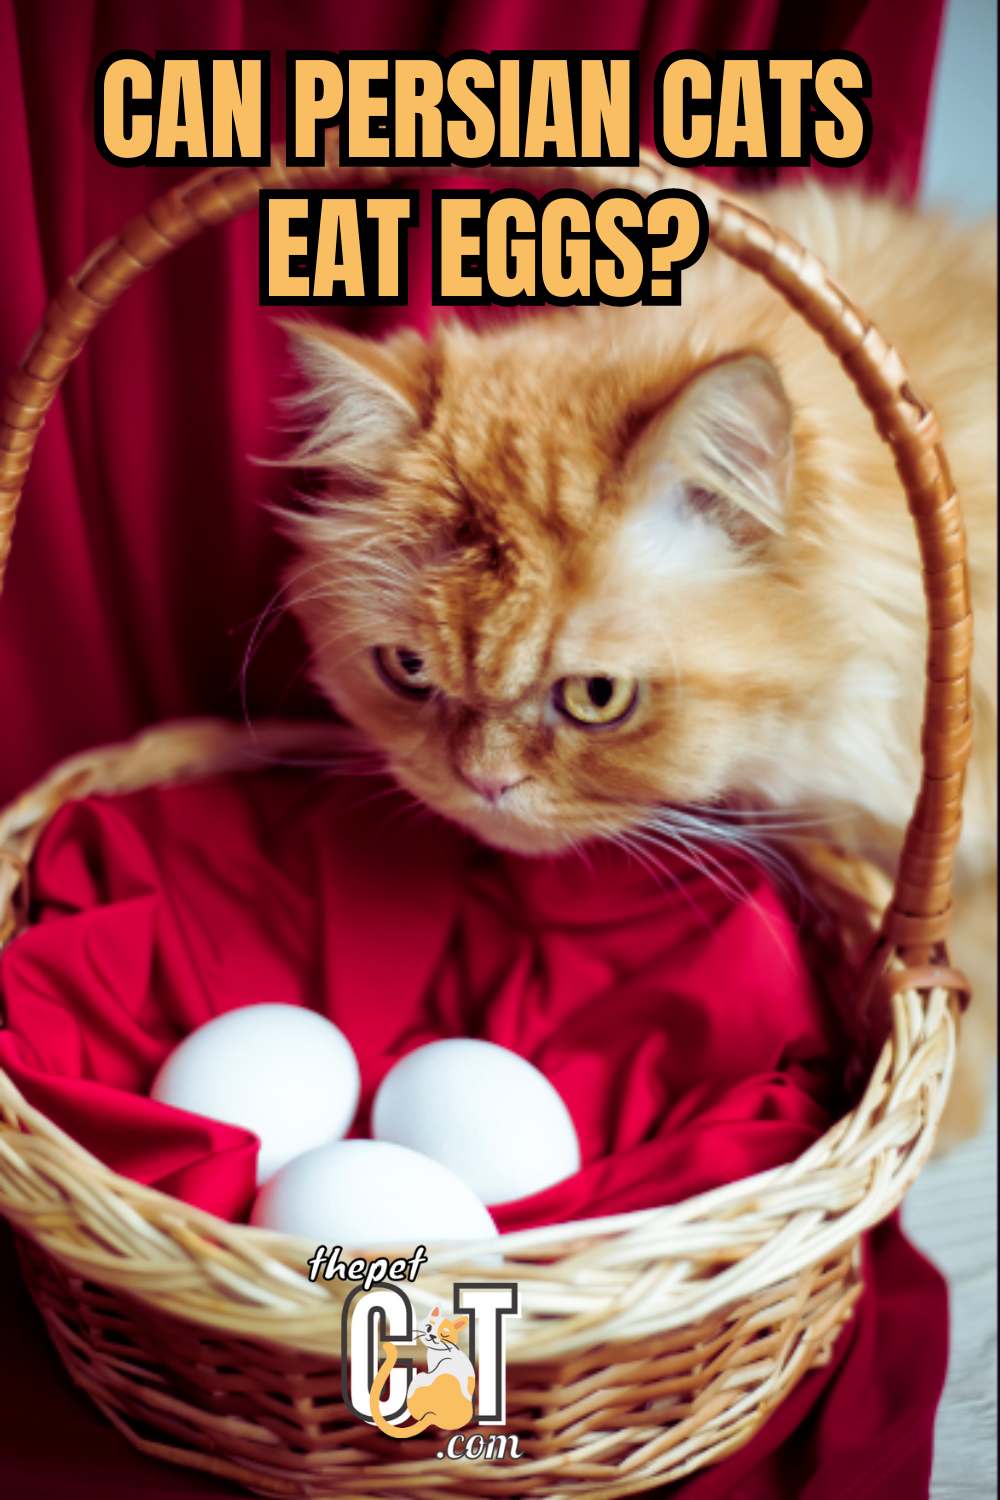 Can Persian cats eat eggs